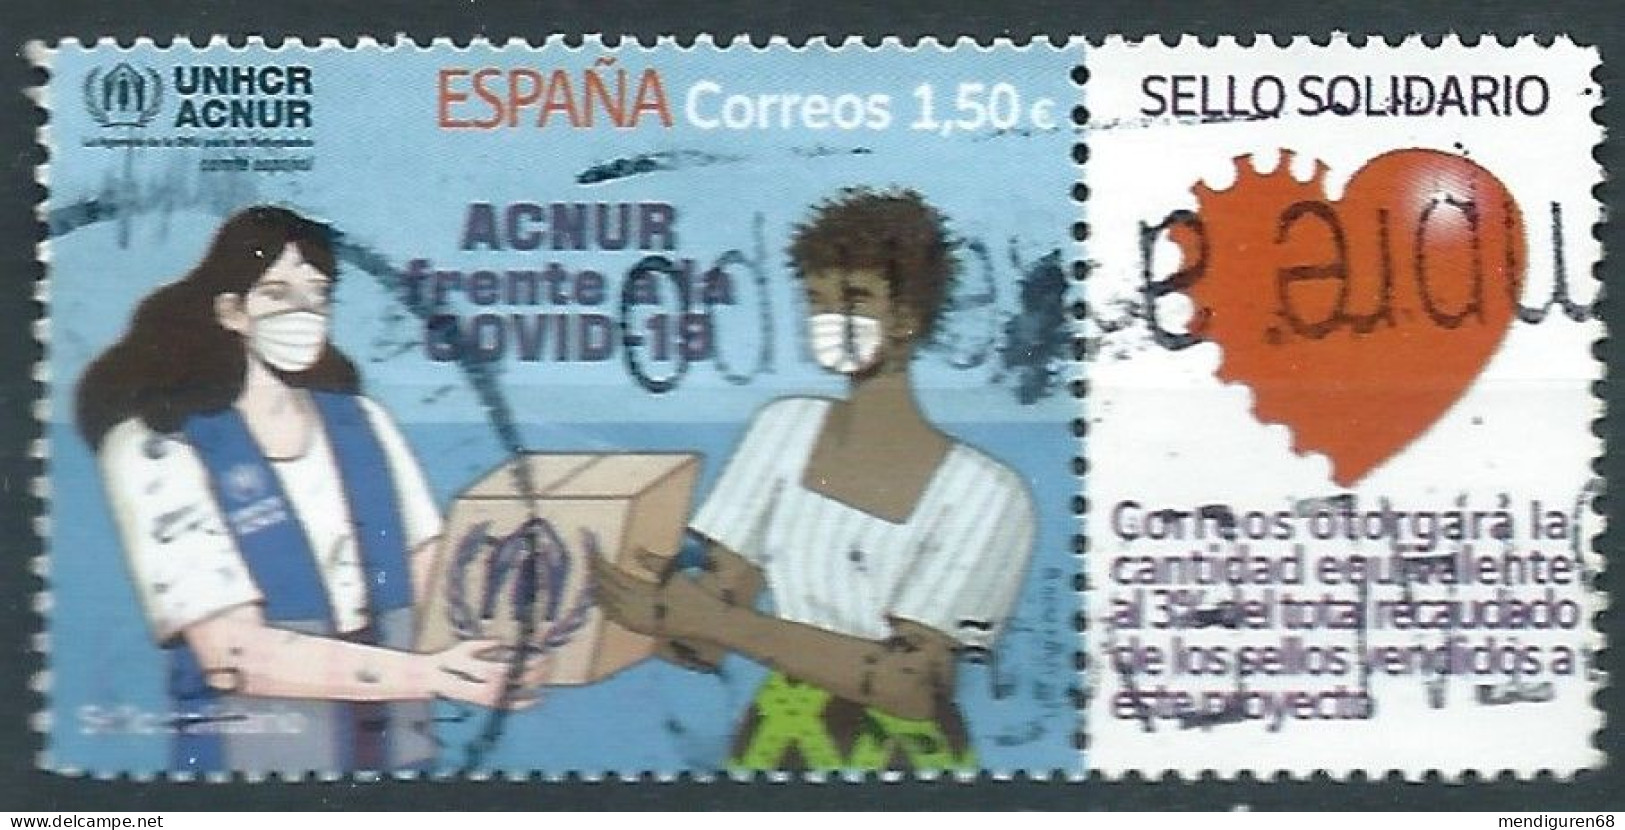 ESPAGNE SPANIEN SPAIN ESPAÑA 2021 SOLIDARITY STAMP ACNUR AGAINST COVID-19 CONTRA USED ED 5497 MI 5547 YT 5252 SC 4537 SG - Used Stamps